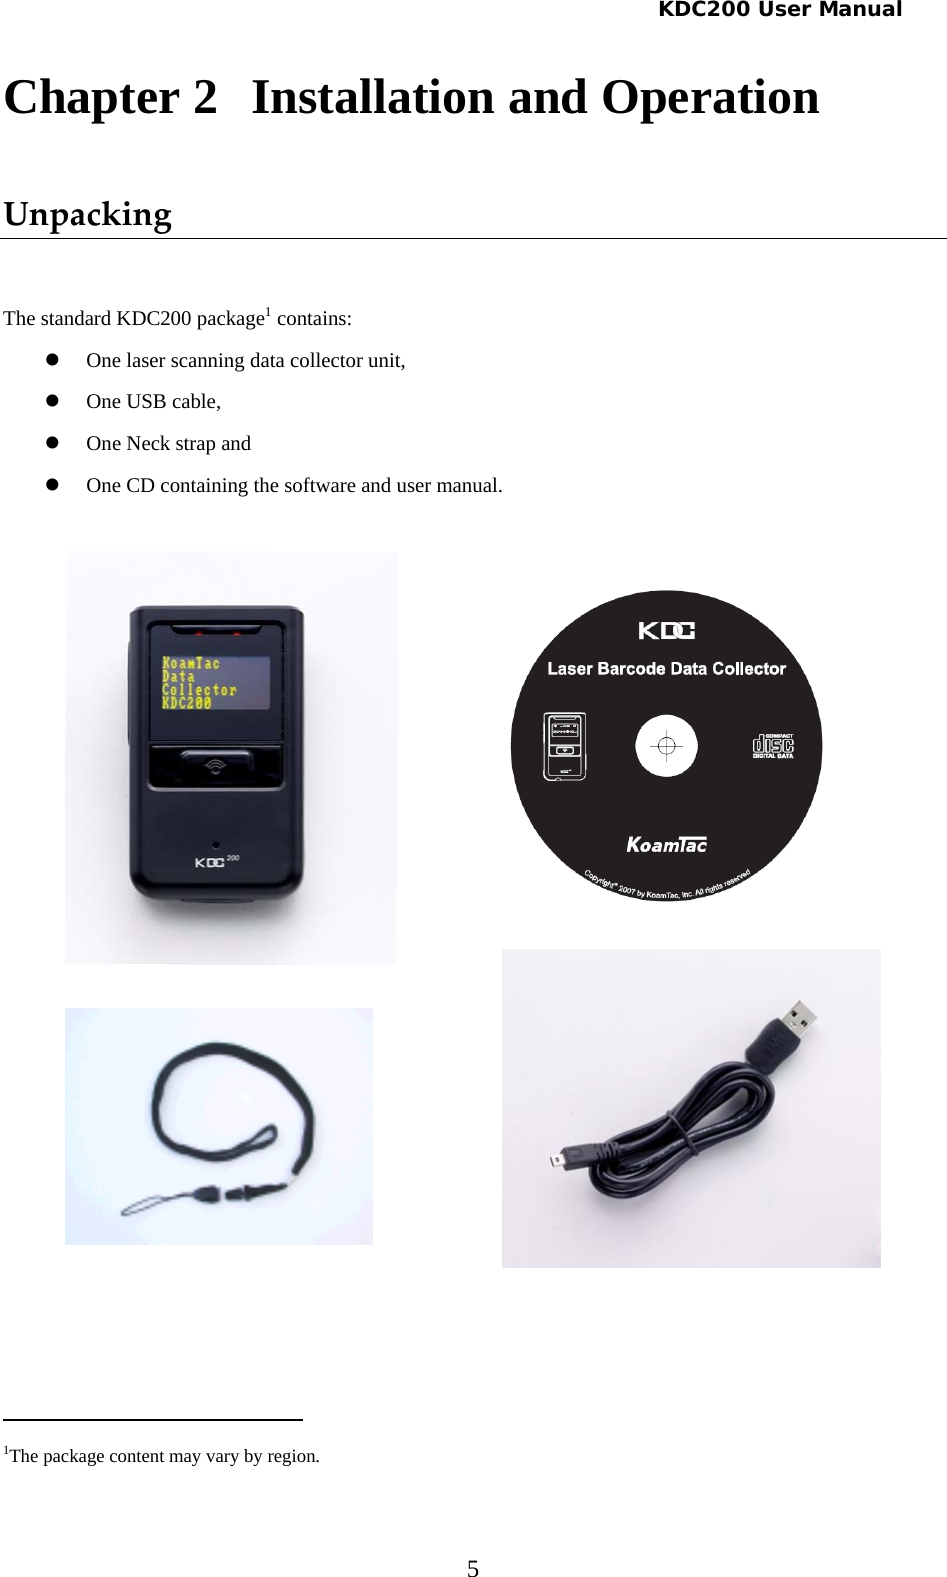   KDC200 User Manual 5 Chapter 2   Installation and Operation Unpacking The standard KDC200 package1 contains: z One laser scanning data collector unit, z One USB cable,  z One Neck strap and  z One CD containing the software and user manual.                                                       1The package content may vary by region. 